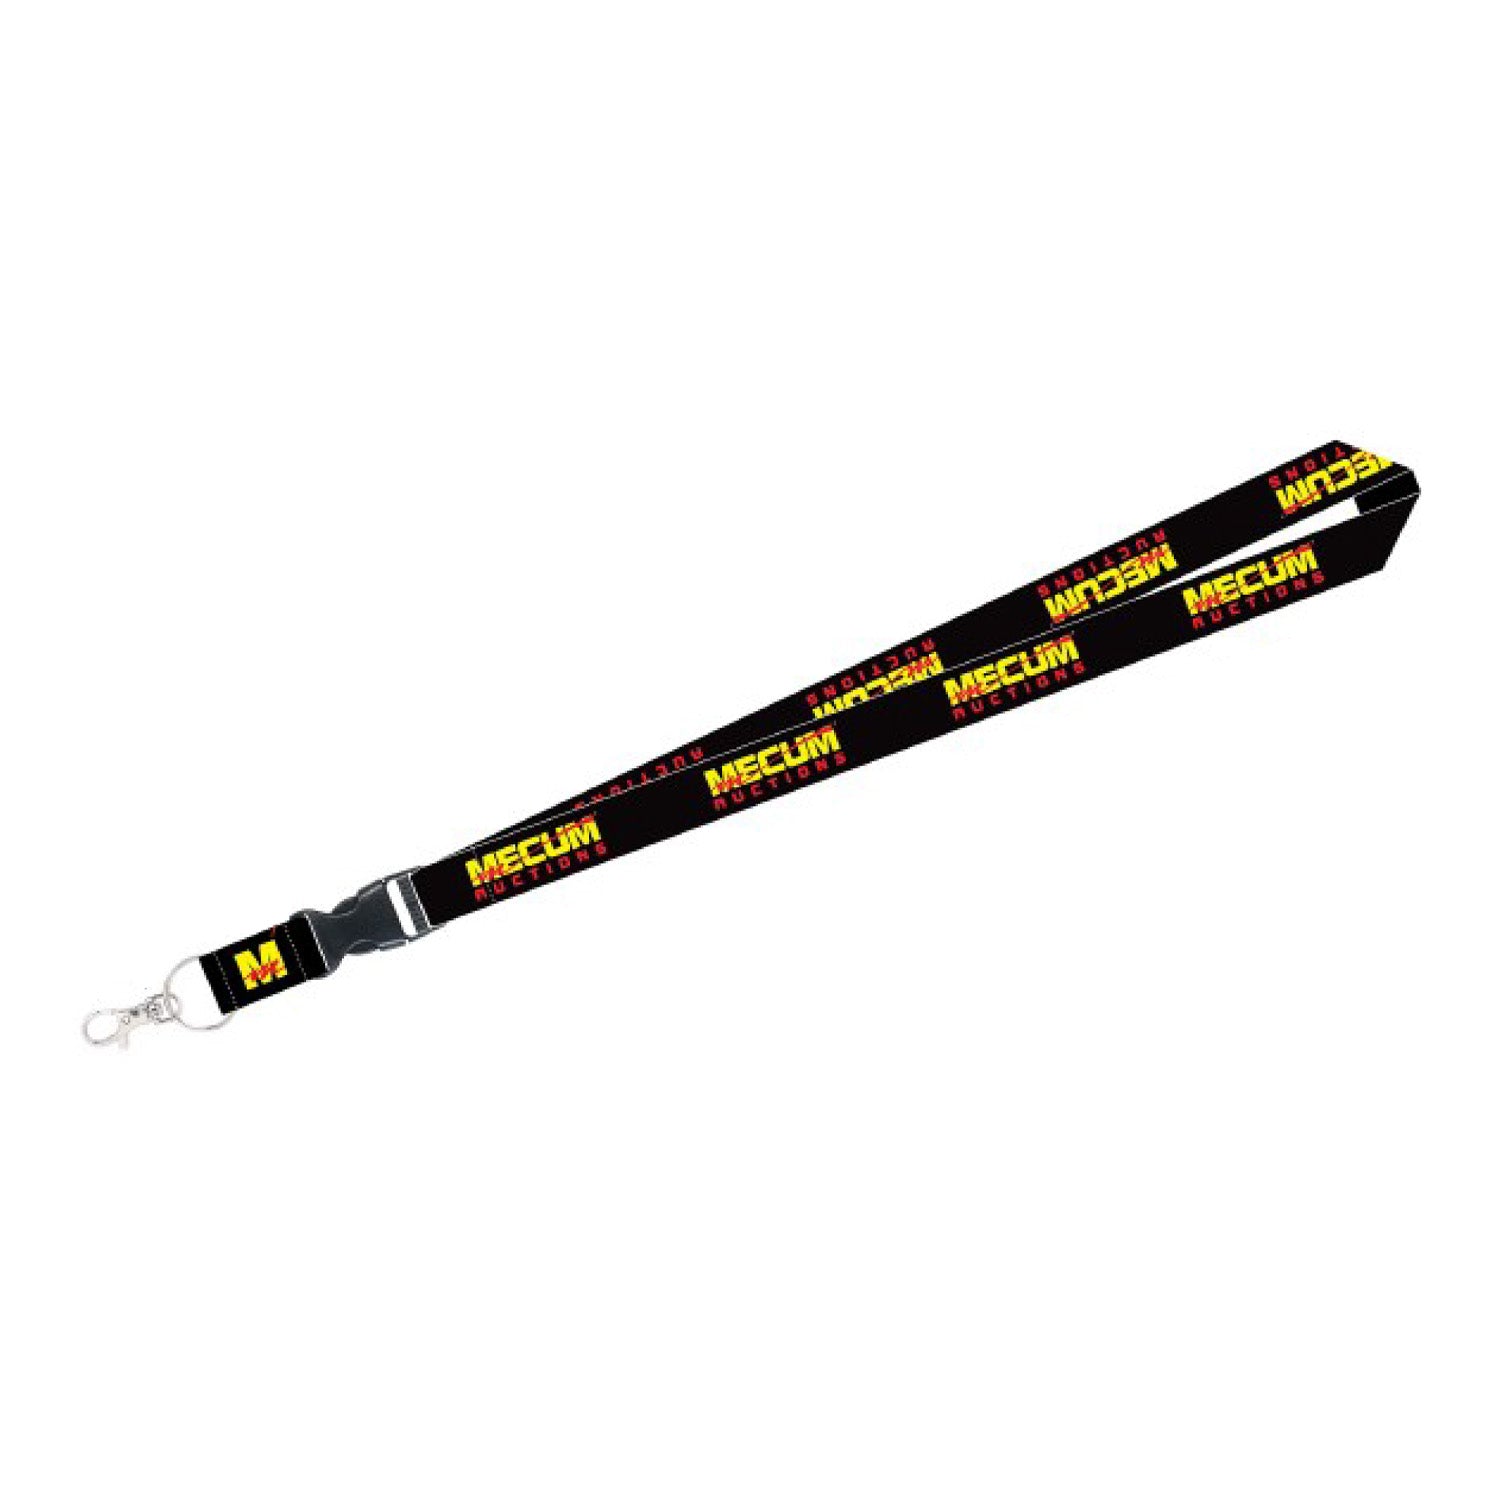 Mecum Auction Lanyard - Front View